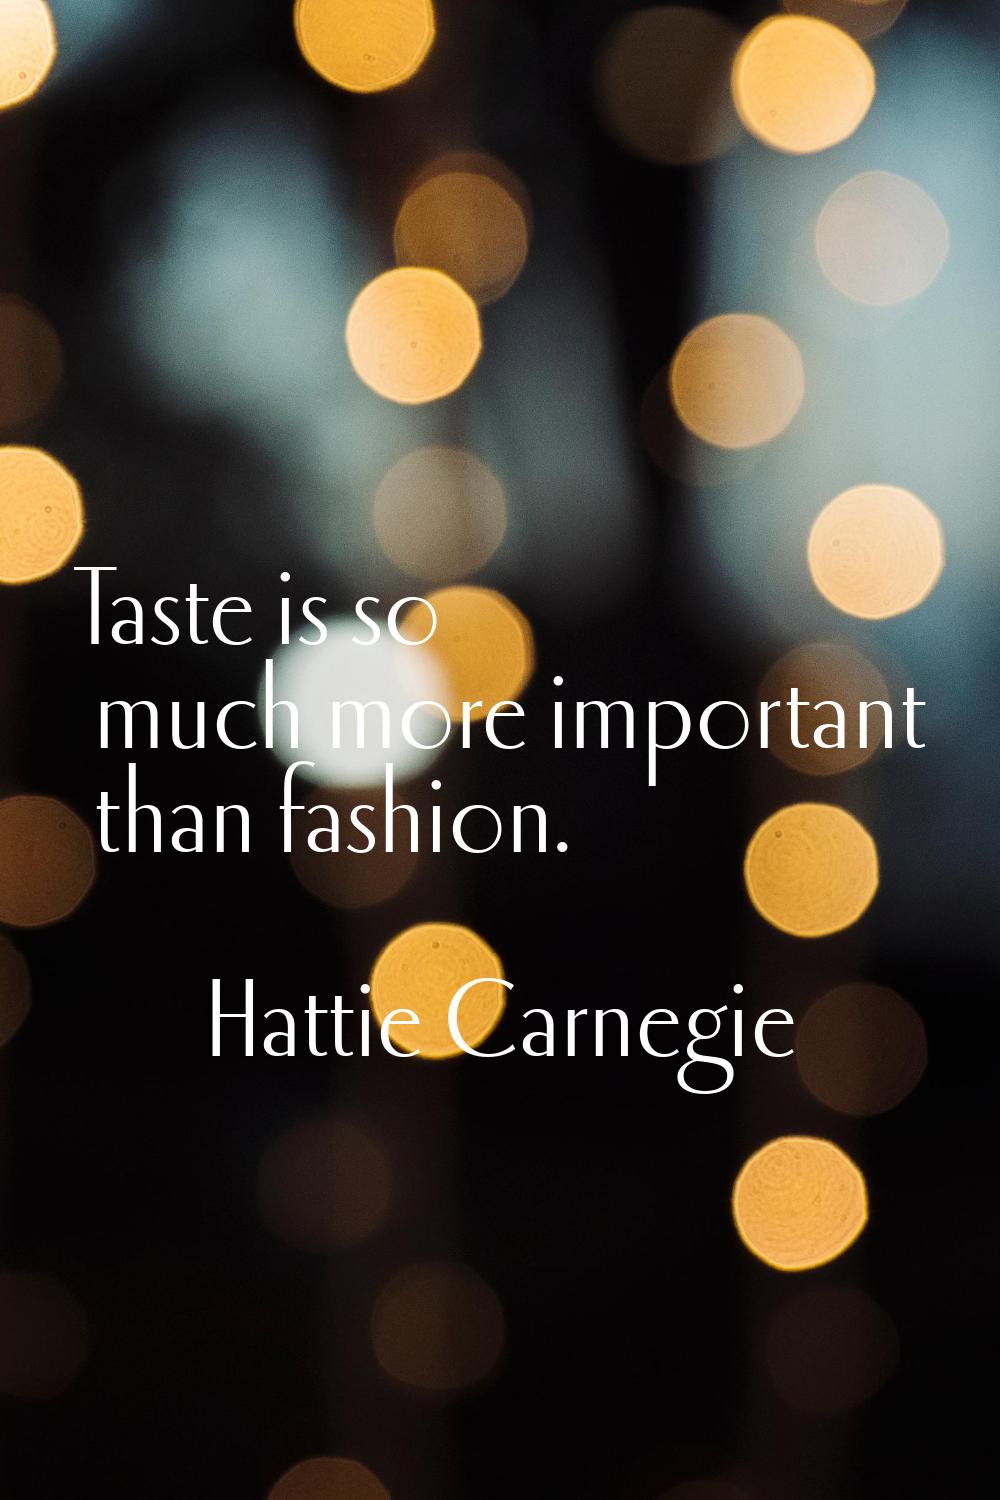 Taste is so much more important than fashion.